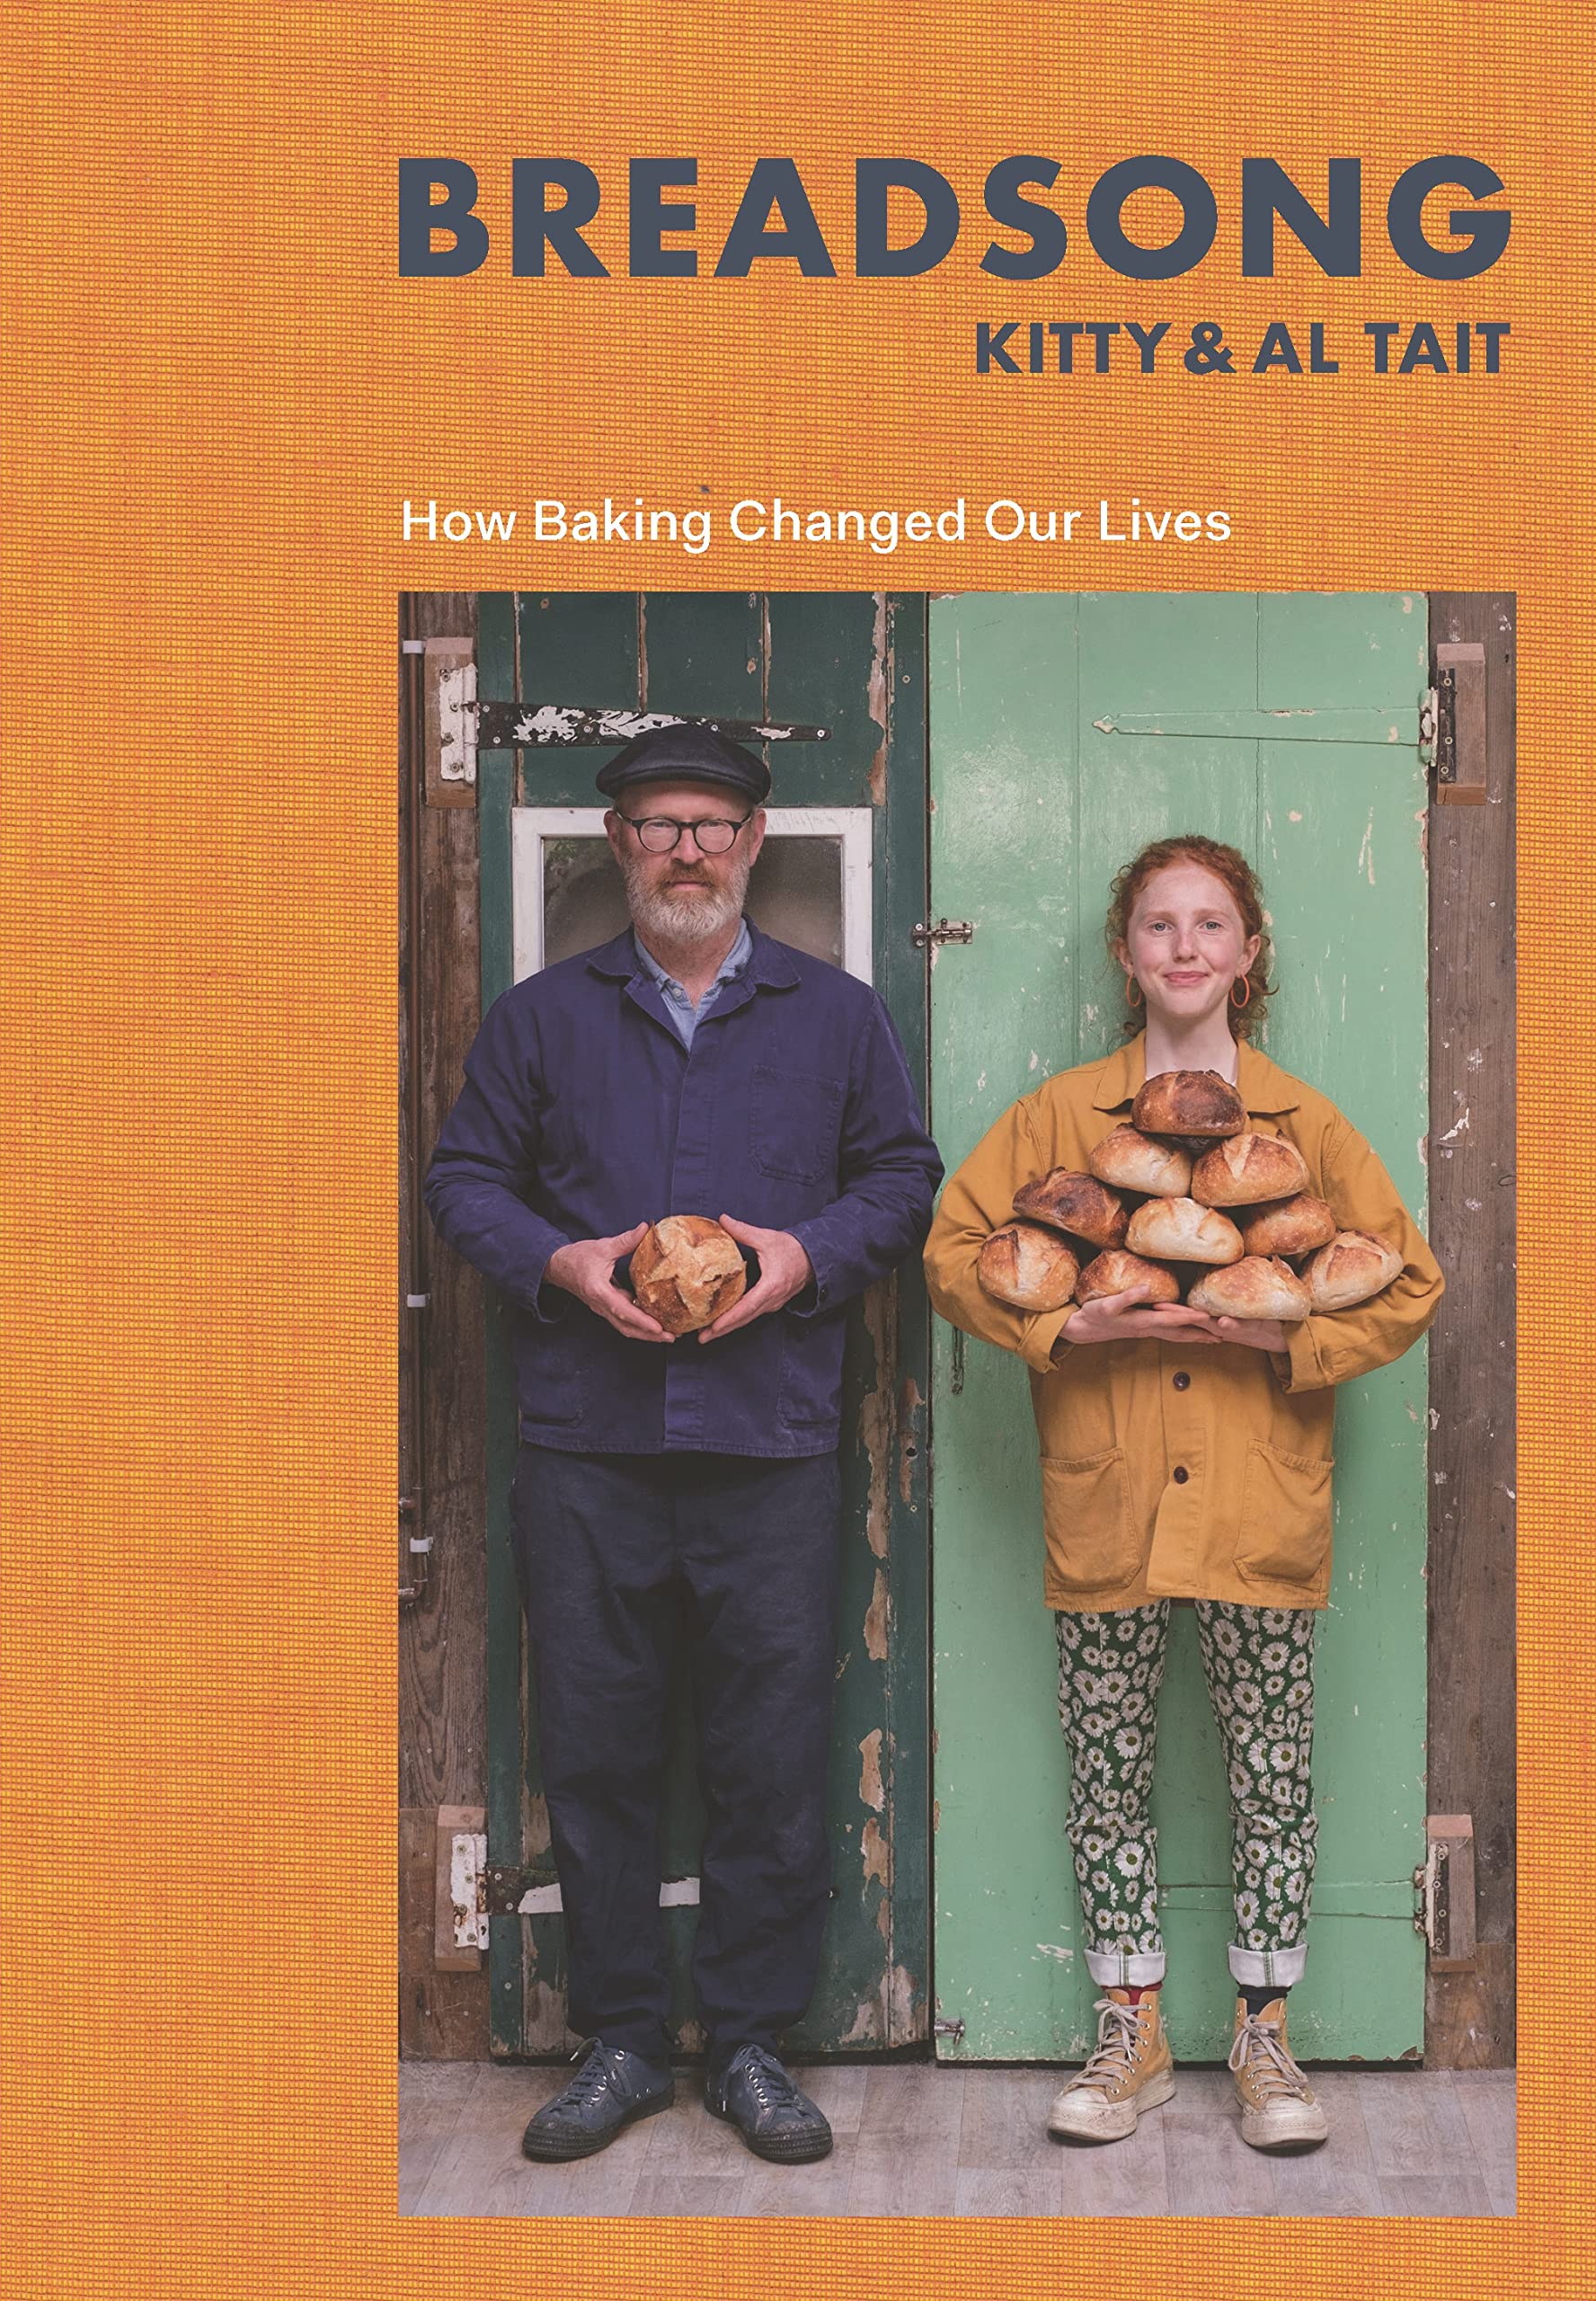 Breadsong: How Baking Changed Our Lives (Kitty Tait, Al Tait)